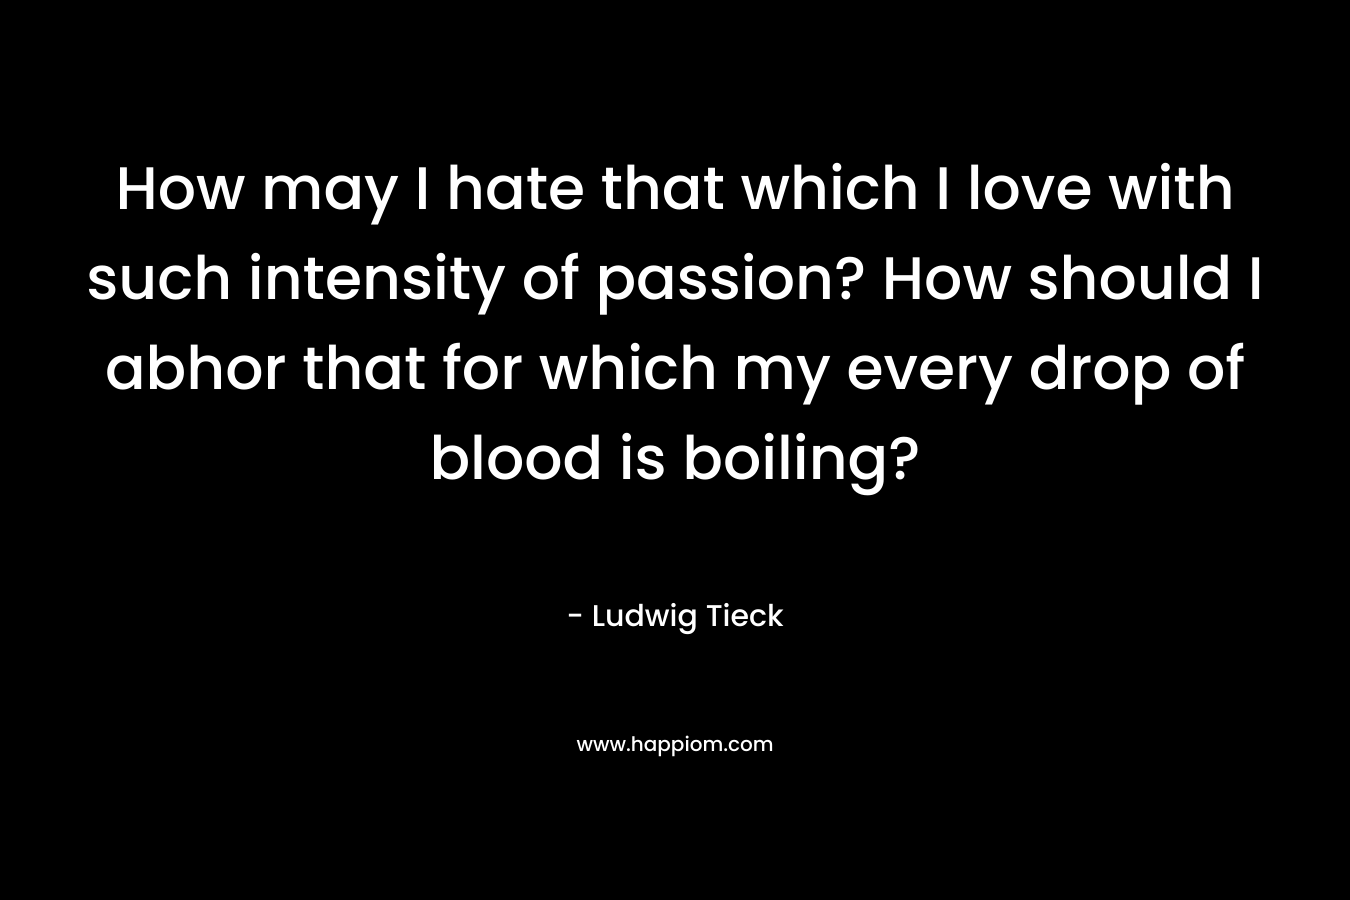 How may I hate that which I love with such intensity of passion? How should I abhor that for which my every drop of blood is boiling?